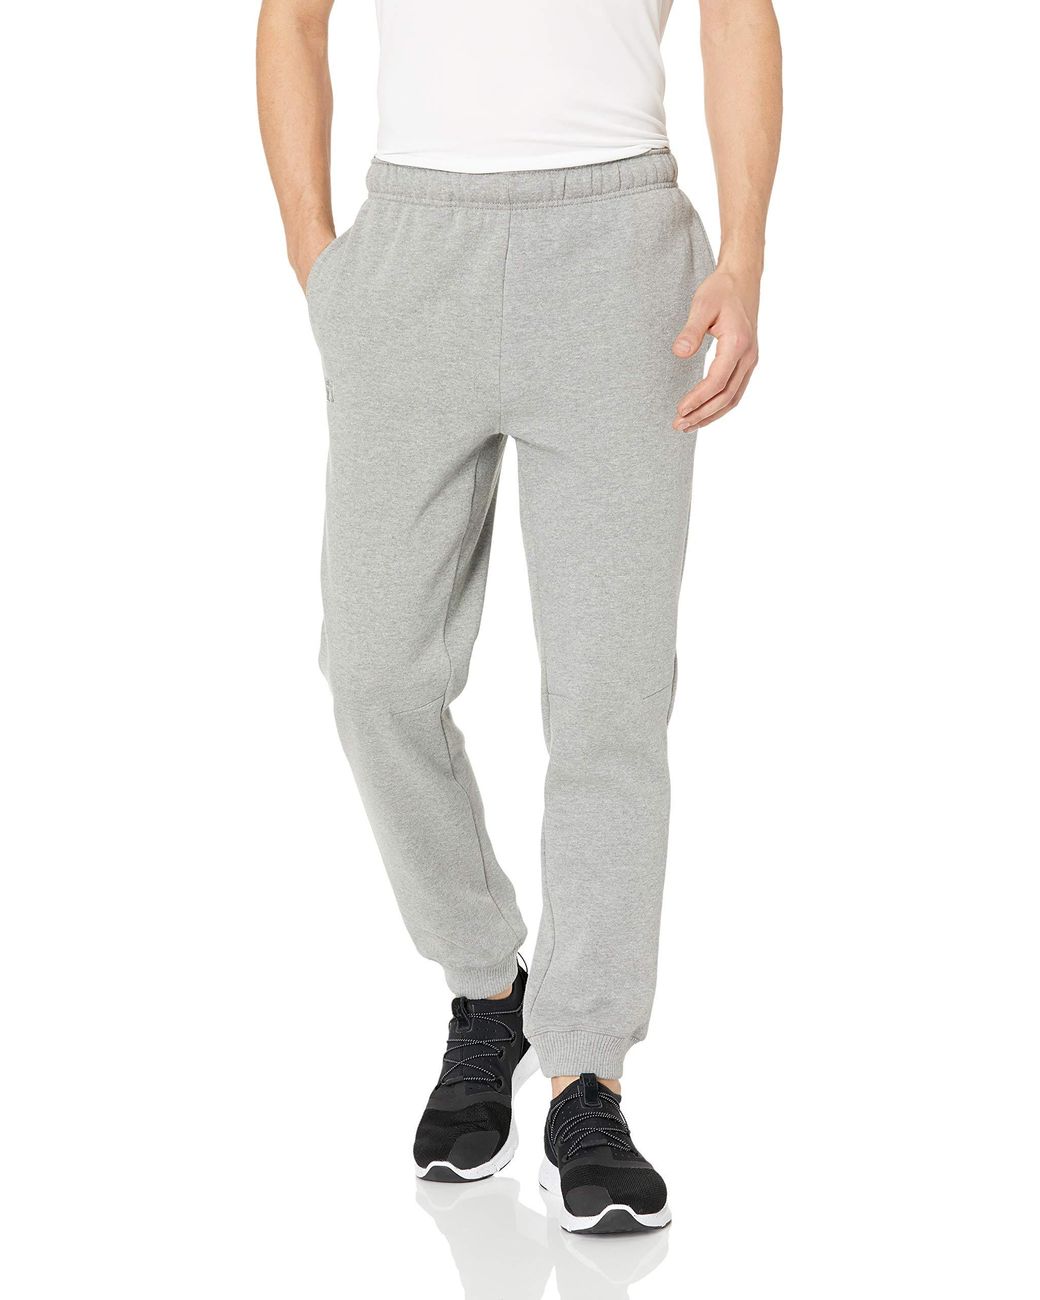 Starter Fleece Jogger Sweatpants With Pockets in Gray for Men - Save 11 ...